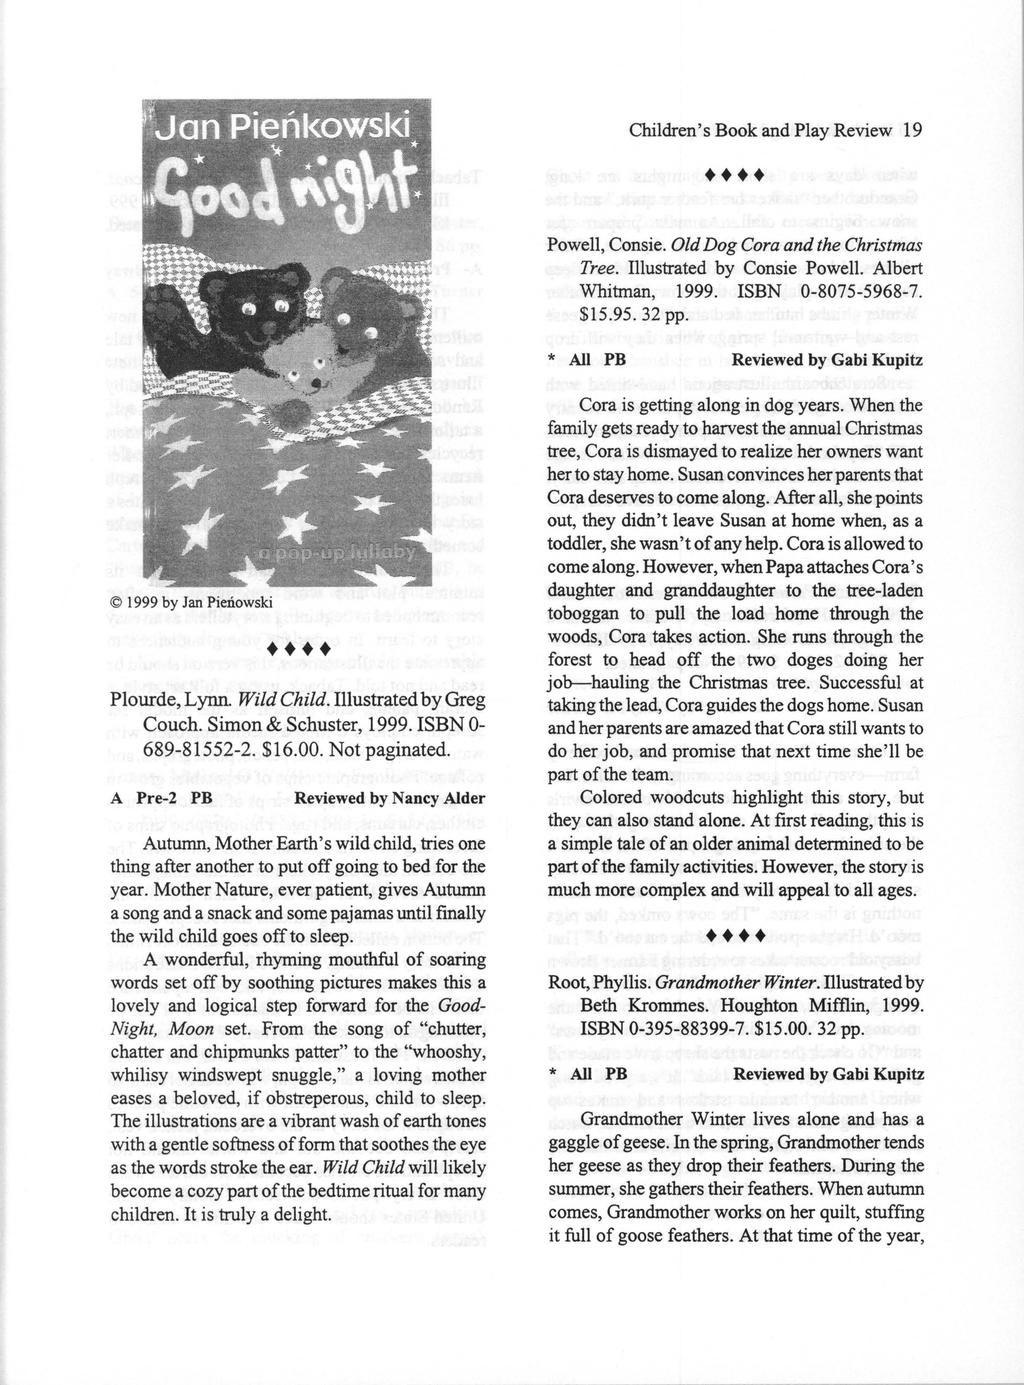 Children's Book and Media Review, Vol. 20 [1999], Iss. 4, Art. 4 Children's Book and Play Review 19 Powell, Consie. Old Dog Cora and the Christmas Tree. Illustrated by Consie Powell.